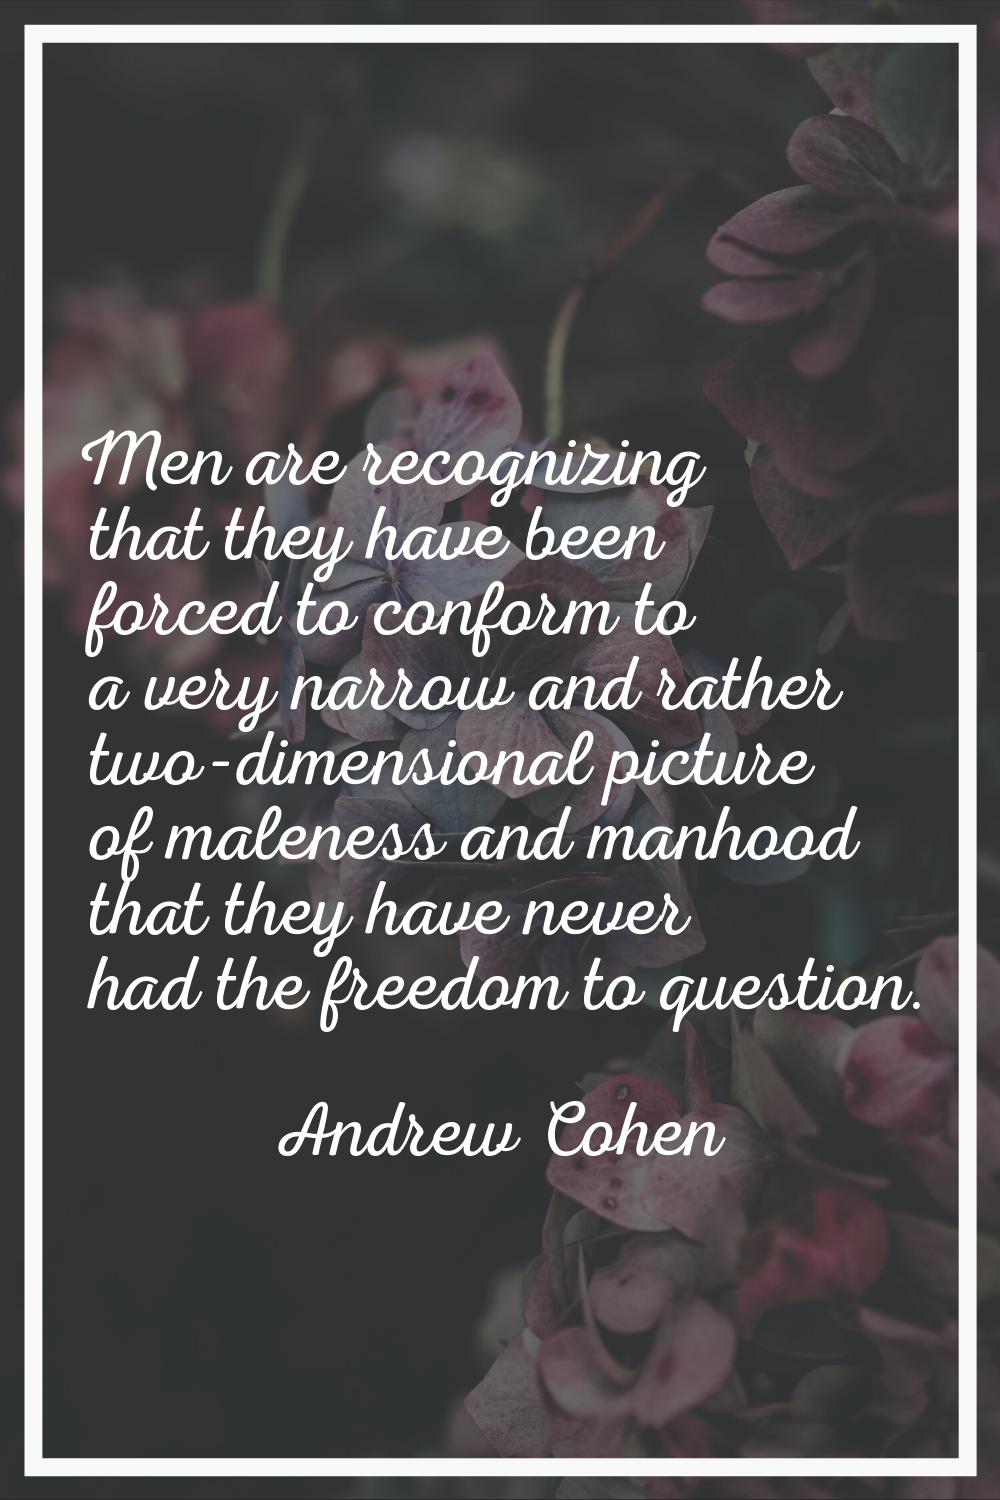 Men are recognizing that they have been forced to conform to a very narrow and rather two-dimension